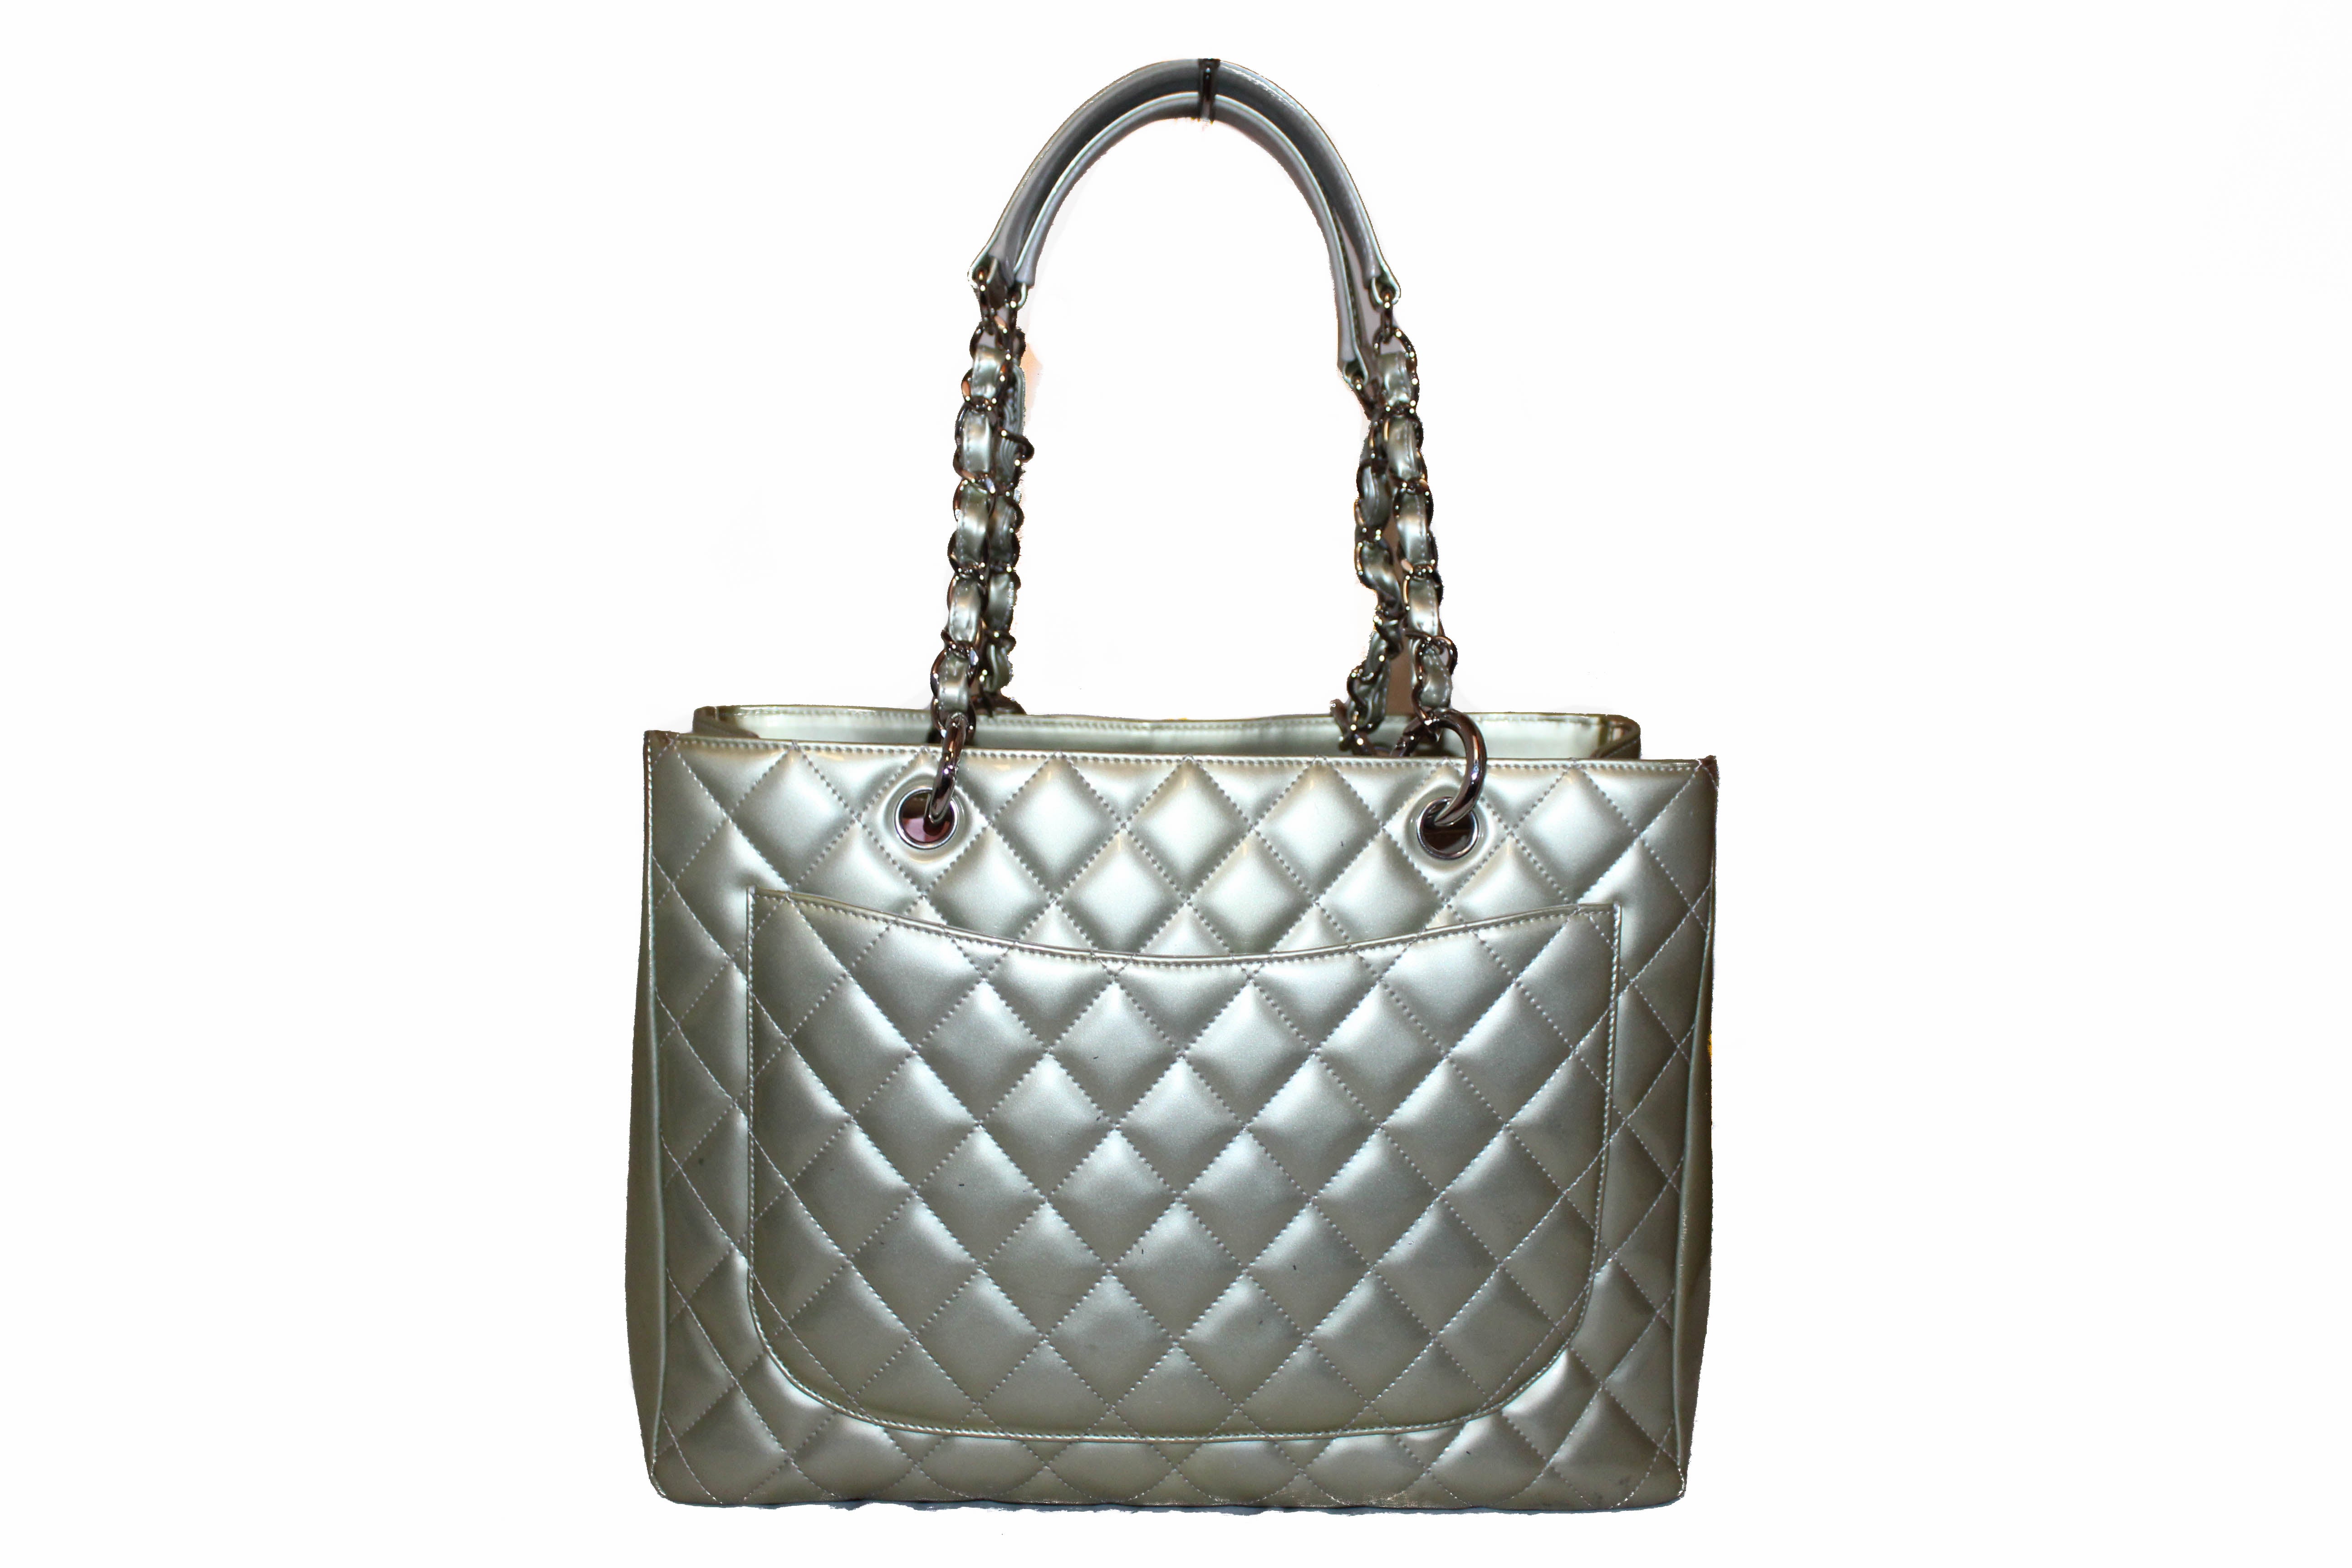 Authentic Chanel Silver Patent Quilted Leather Large Grand Shopping Tote Shoulder Bag